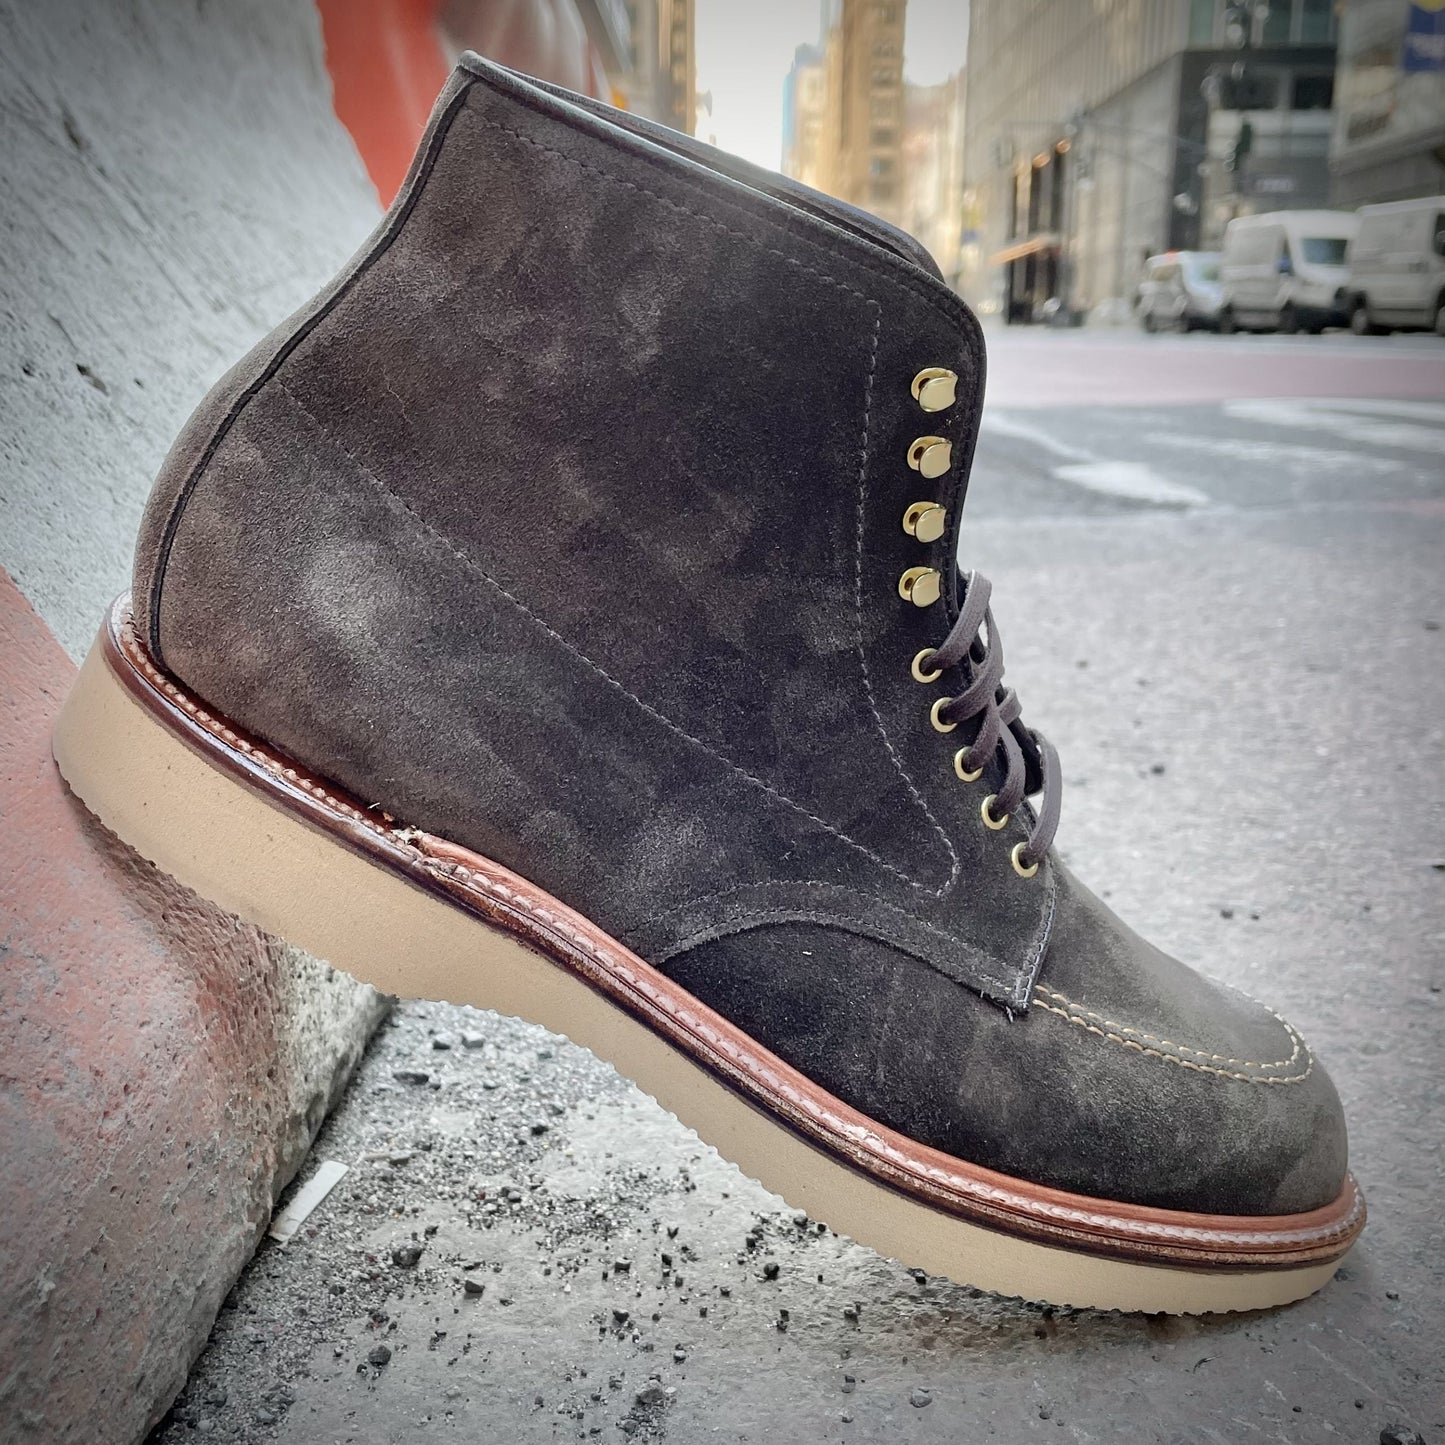 D0938H - Duncan Indy Boot in Loden Suede (Deposit)